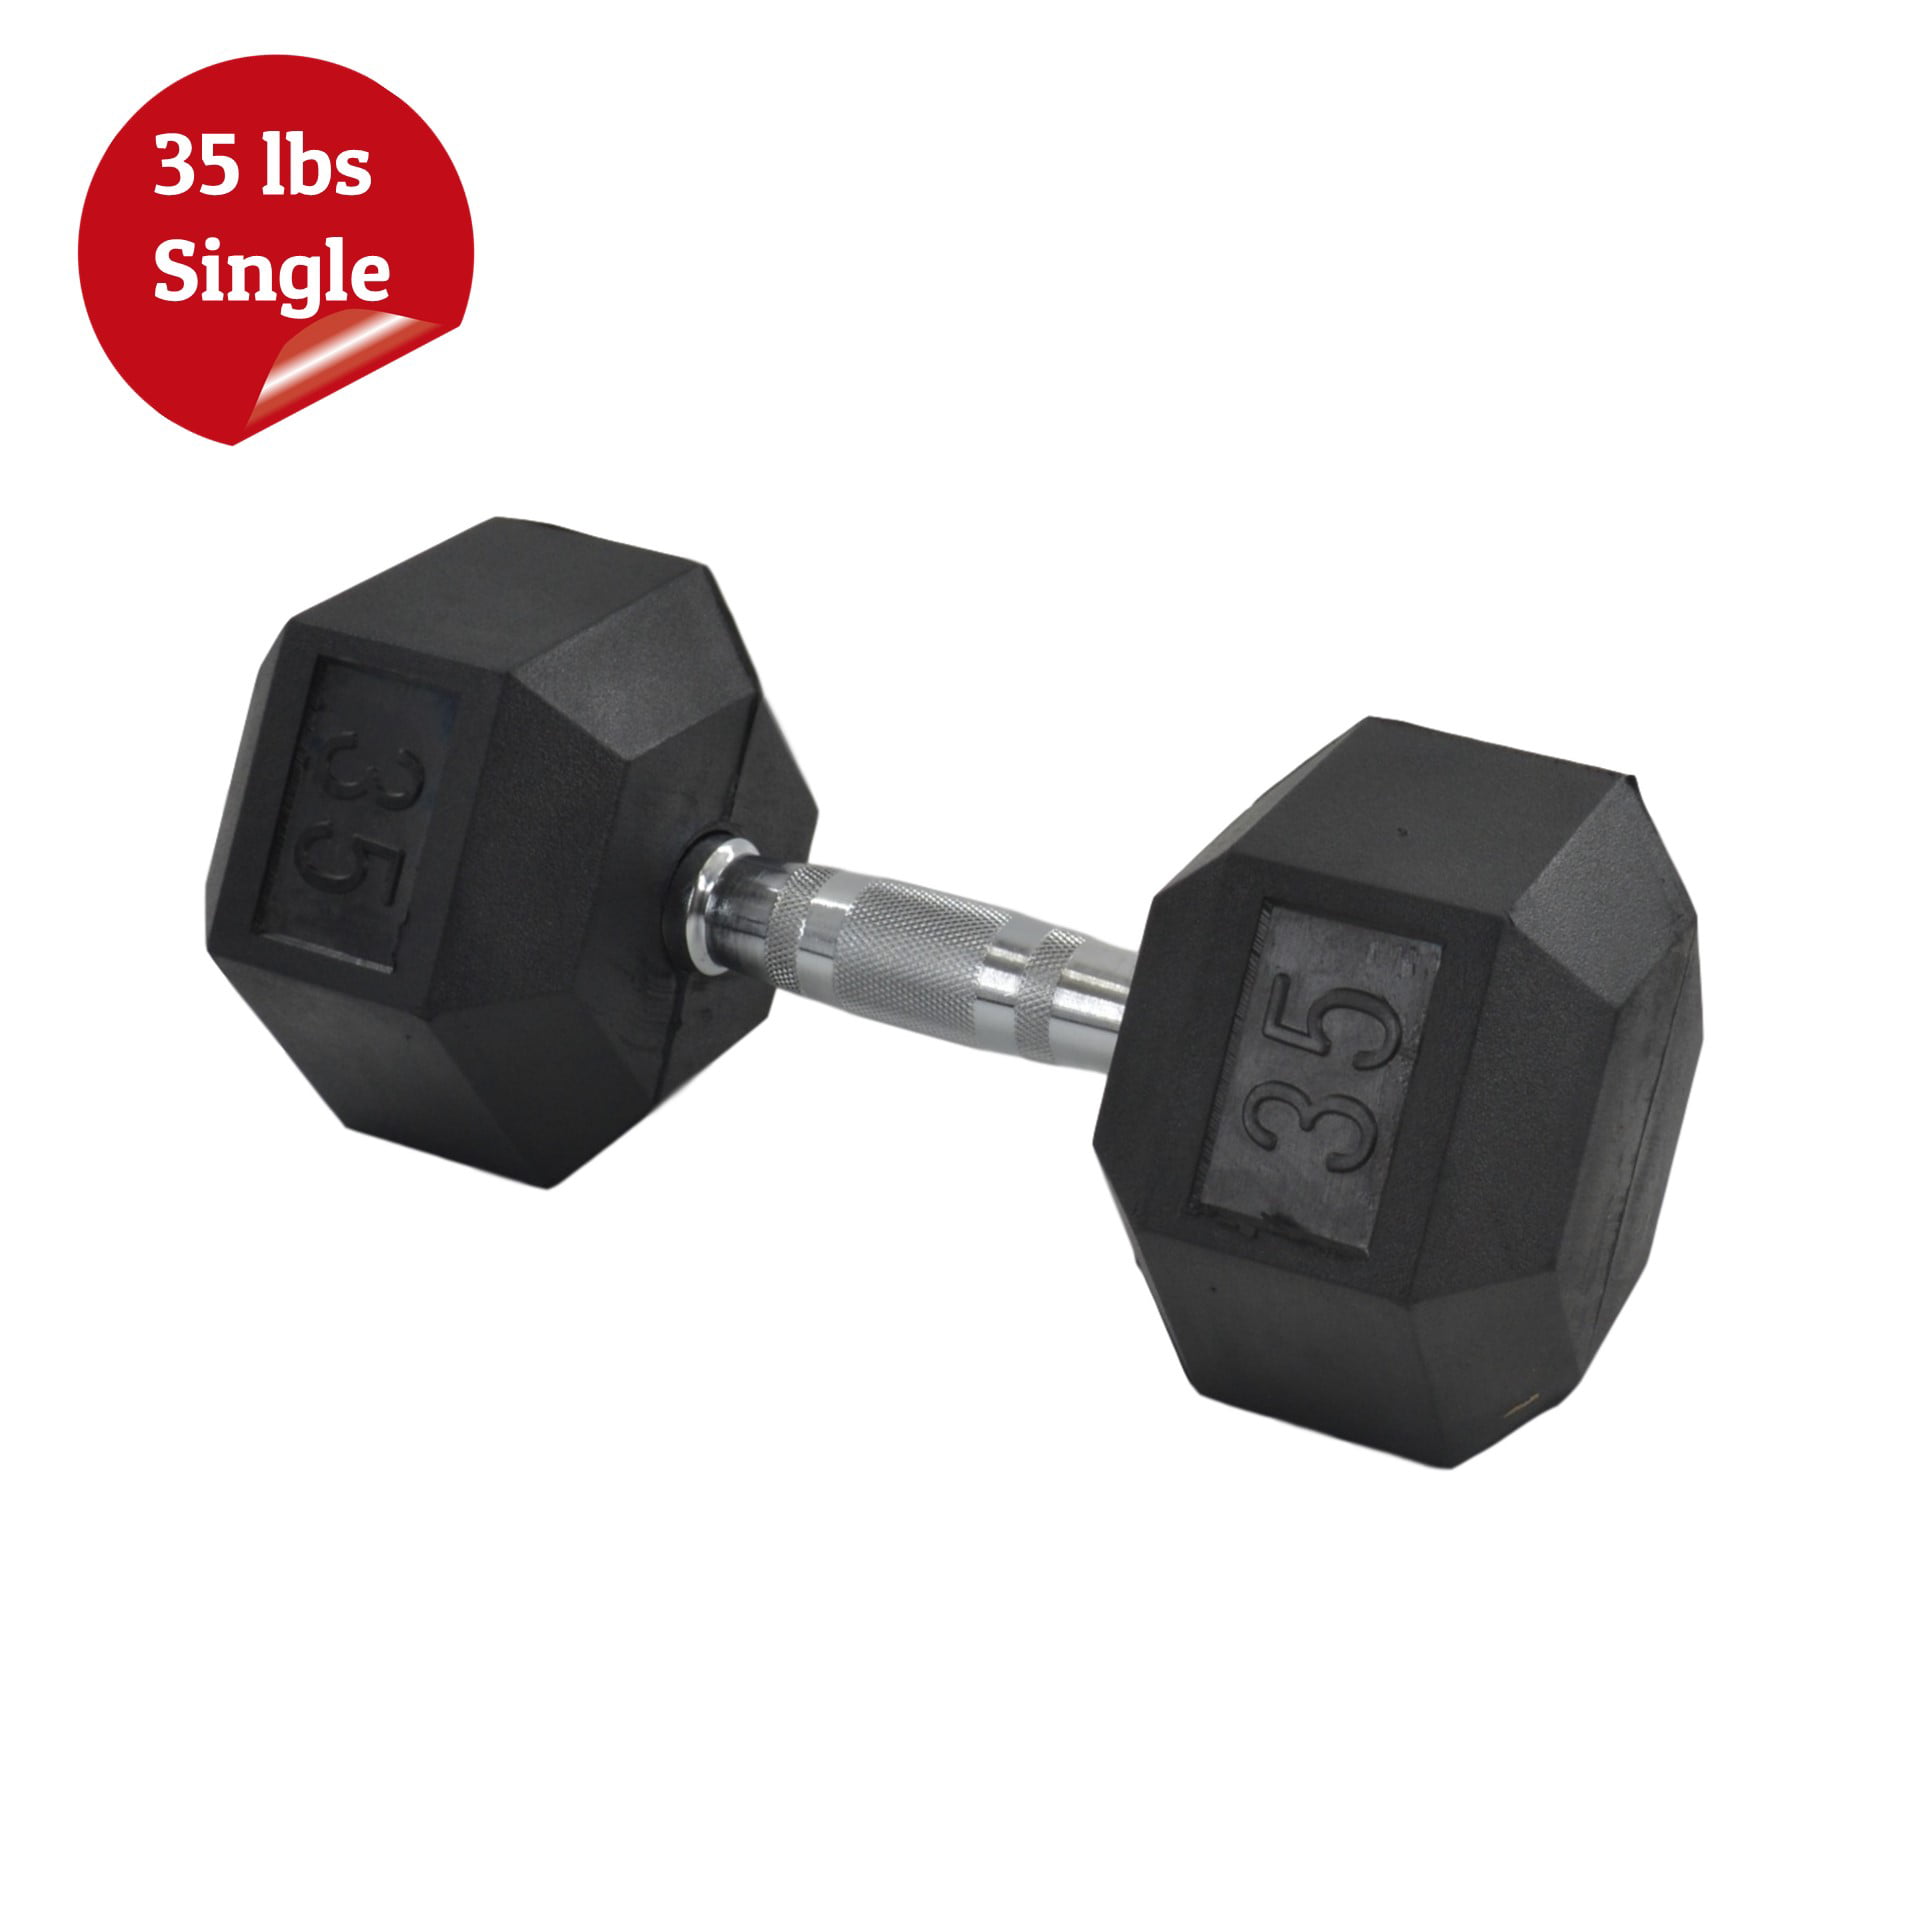 10kg Hex Dumbbells Rubber Weights Sets Training Home Gym Dumbbell Fitness 